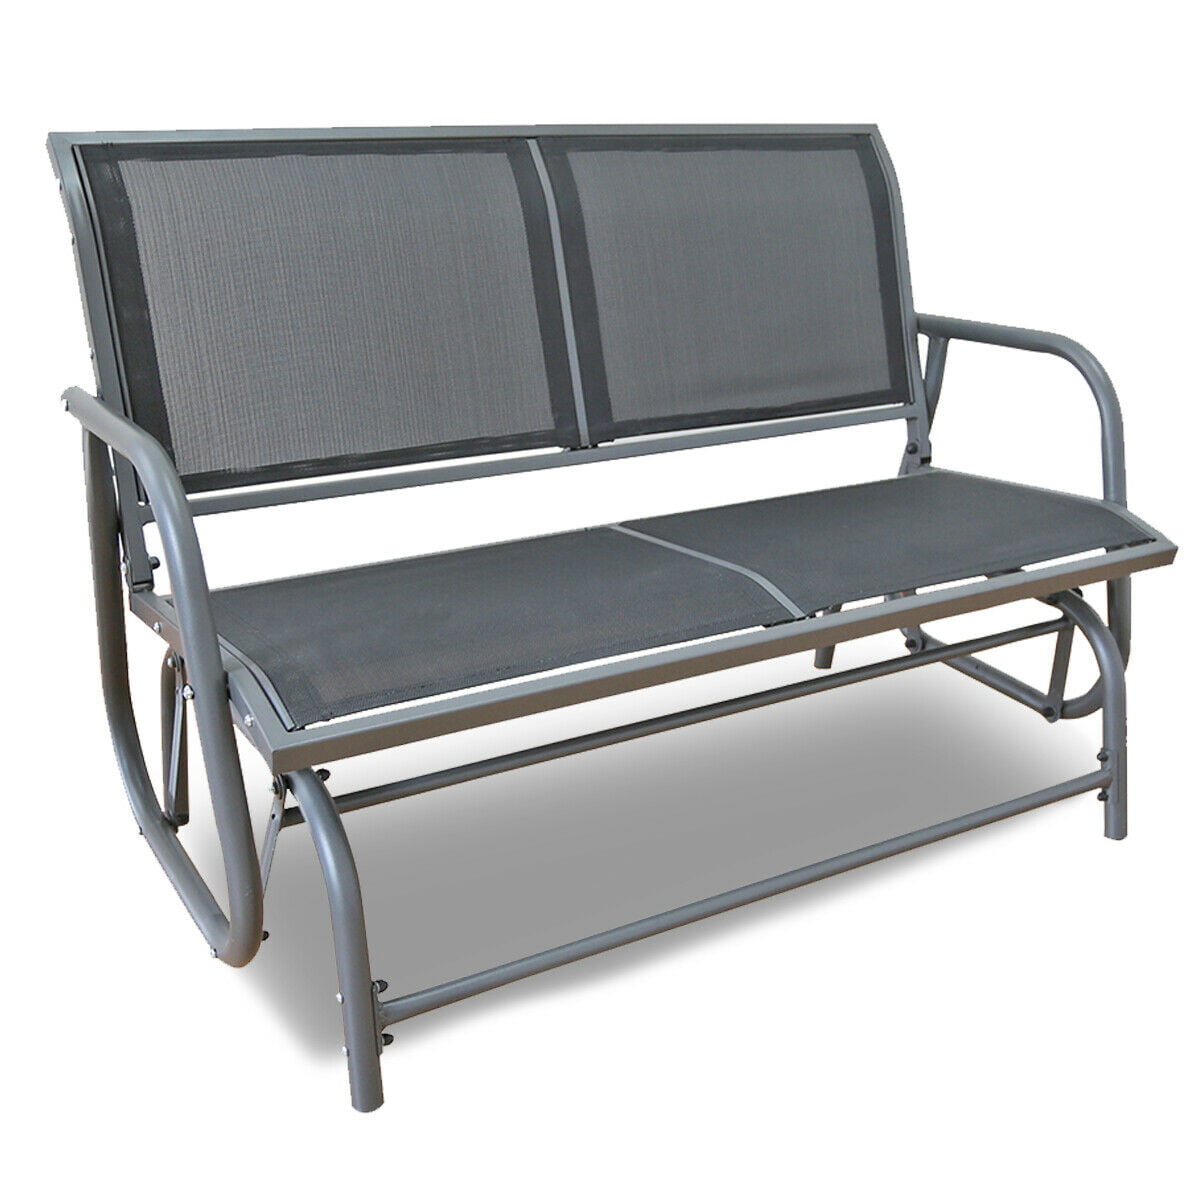 Outdoor Patio Swing Glider Bench Chair, Glider Couch Outdoor